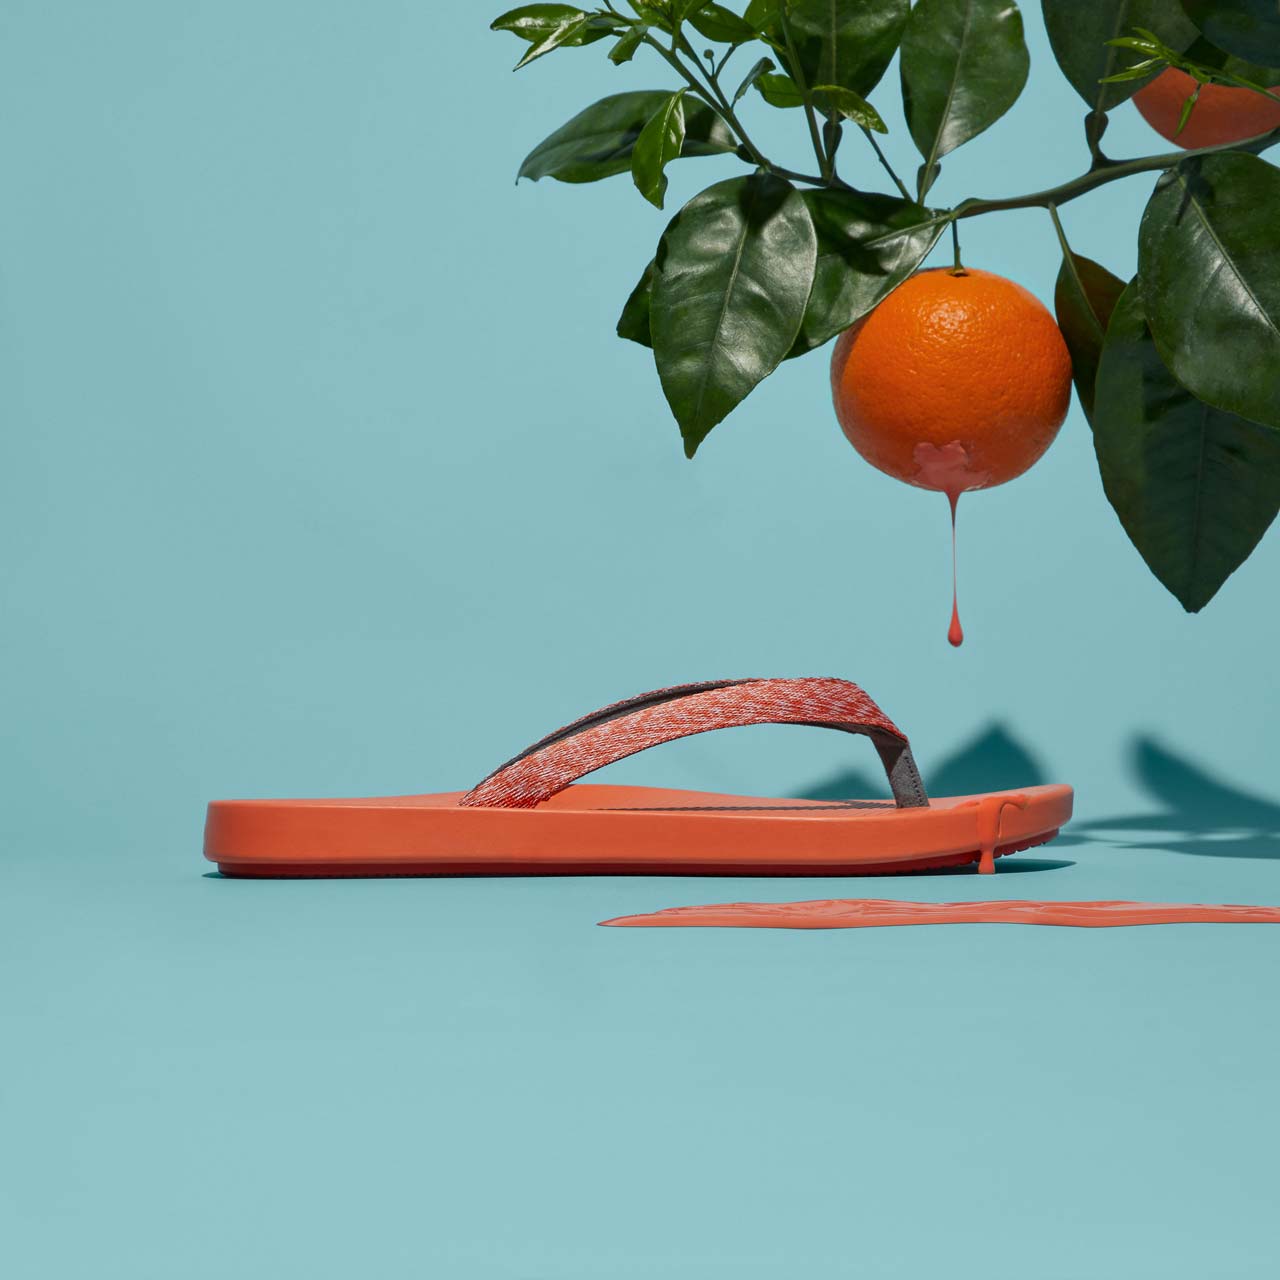 Allbirds Launches Colorful Flip Flops Made from Sugar